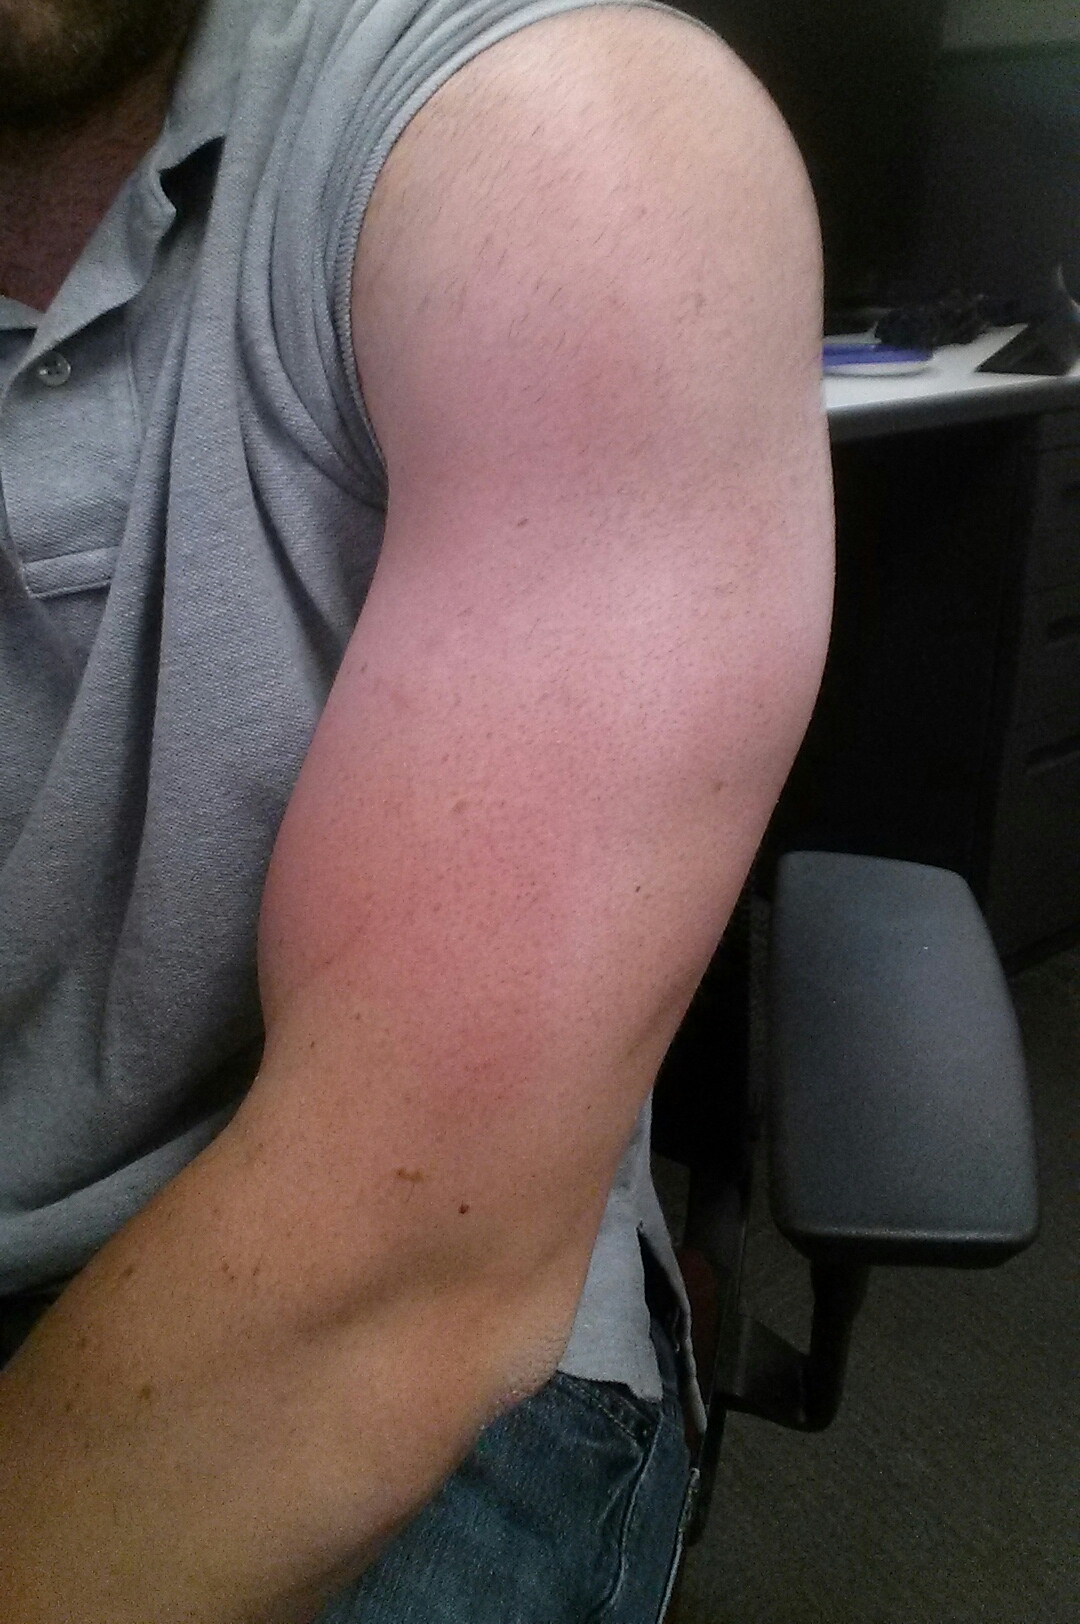 Doctor insights on: Red Rash On Arm Hot To Touch - HealthTap